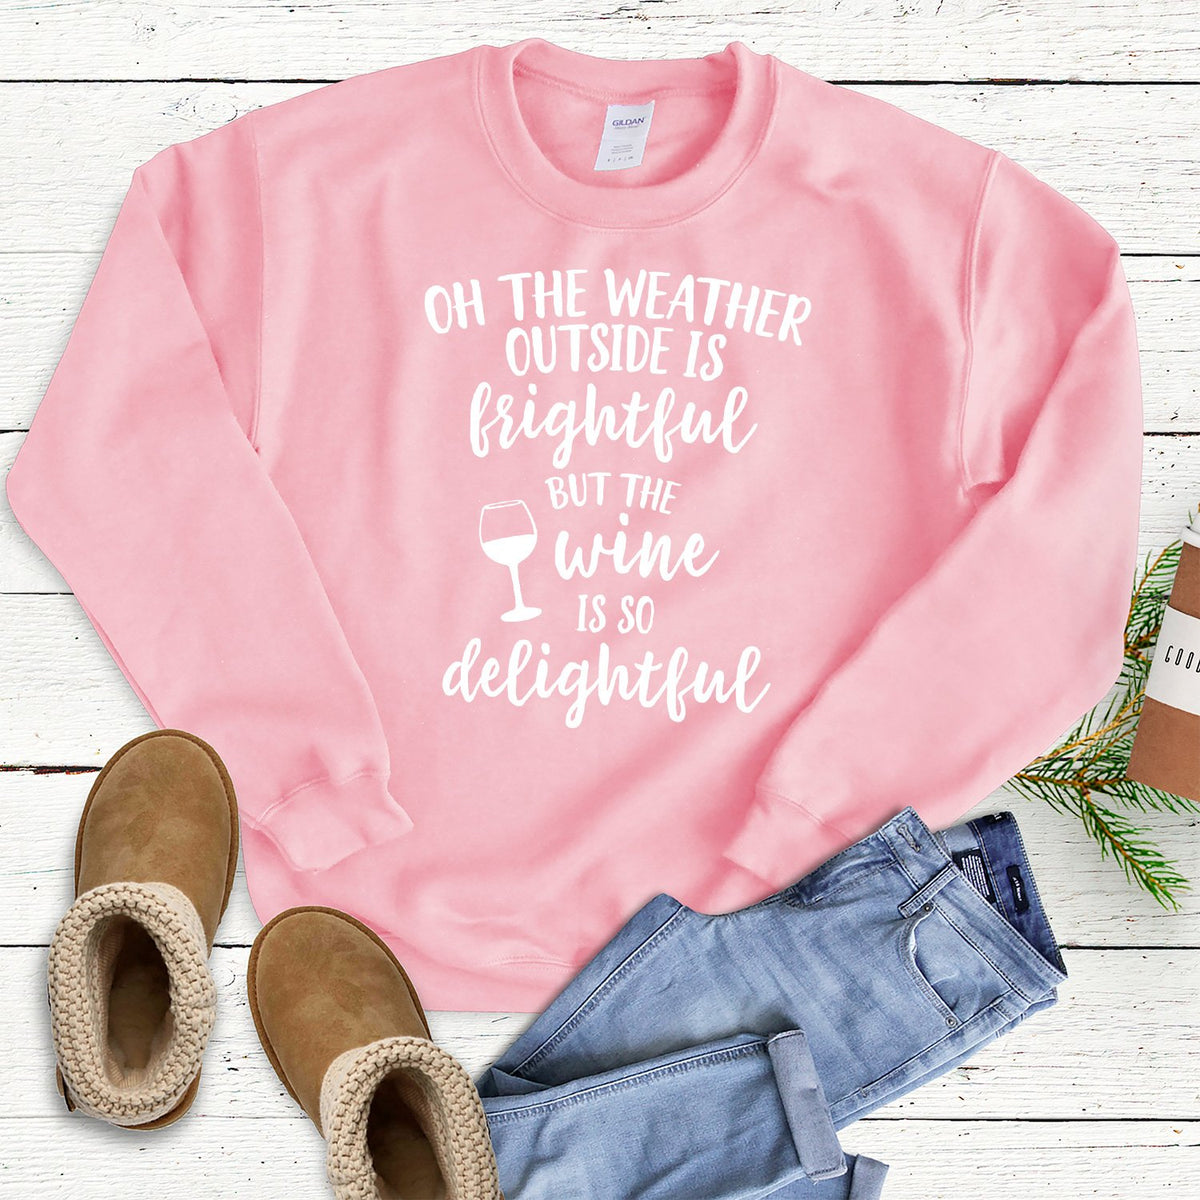 Oh The Weather Outside is Frightful But The Wine is So Delightful - Long Sleeve Heavy Crewneck Sweatshirt